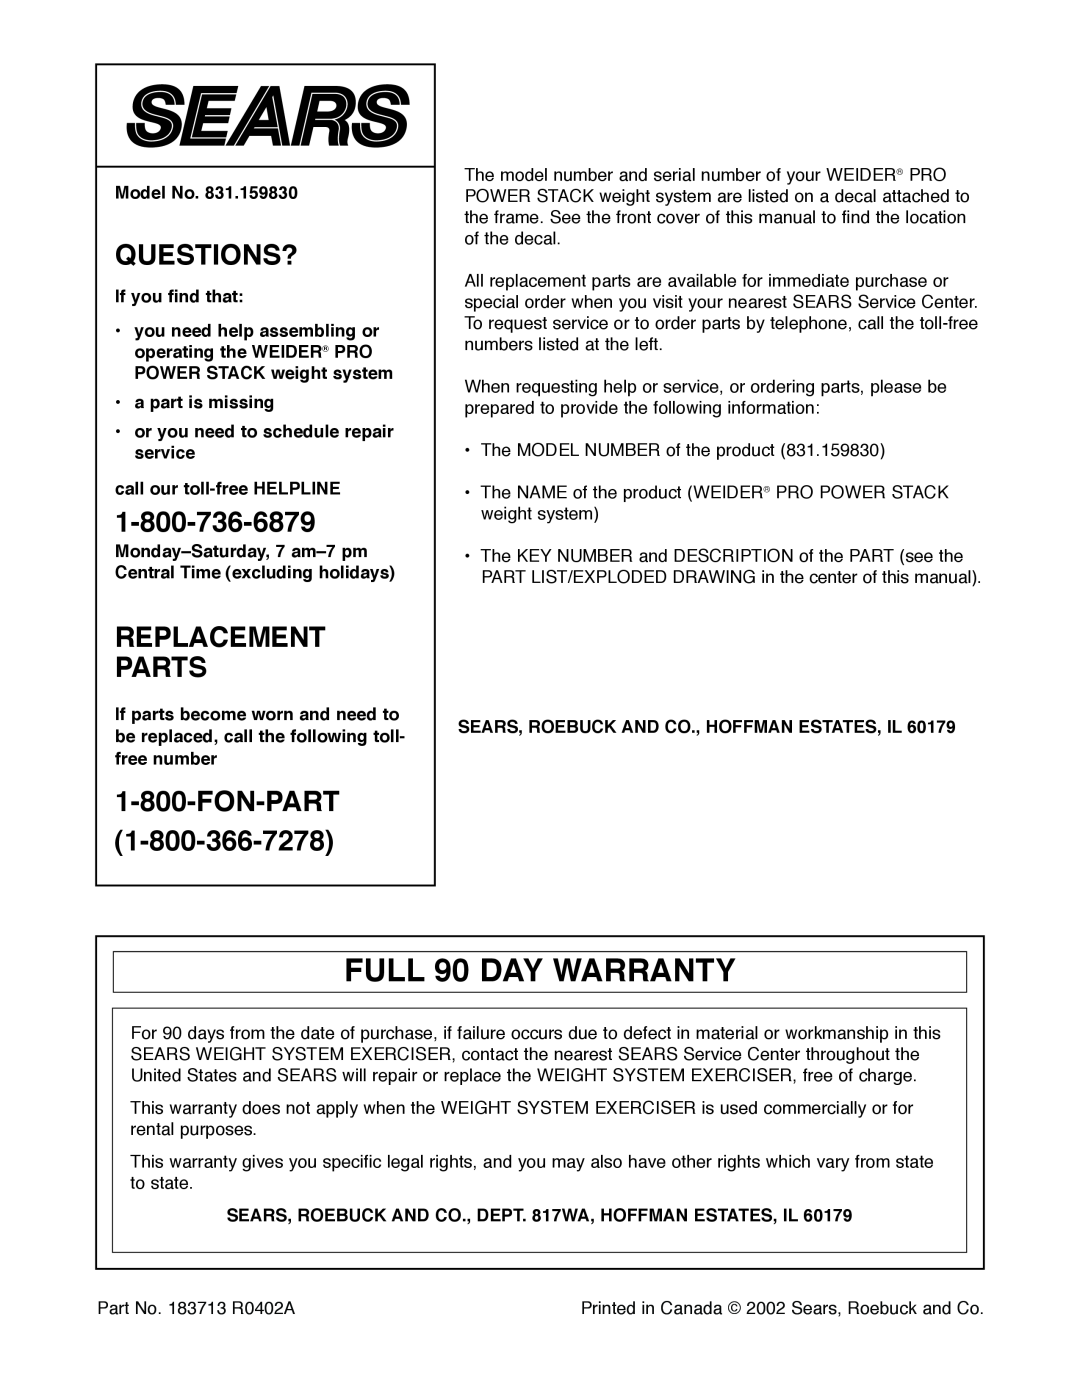 Weider 831.159830 user manual FULL 90 DAY WARRANTY, Questions?, Replacement Parts, Fon-Part 